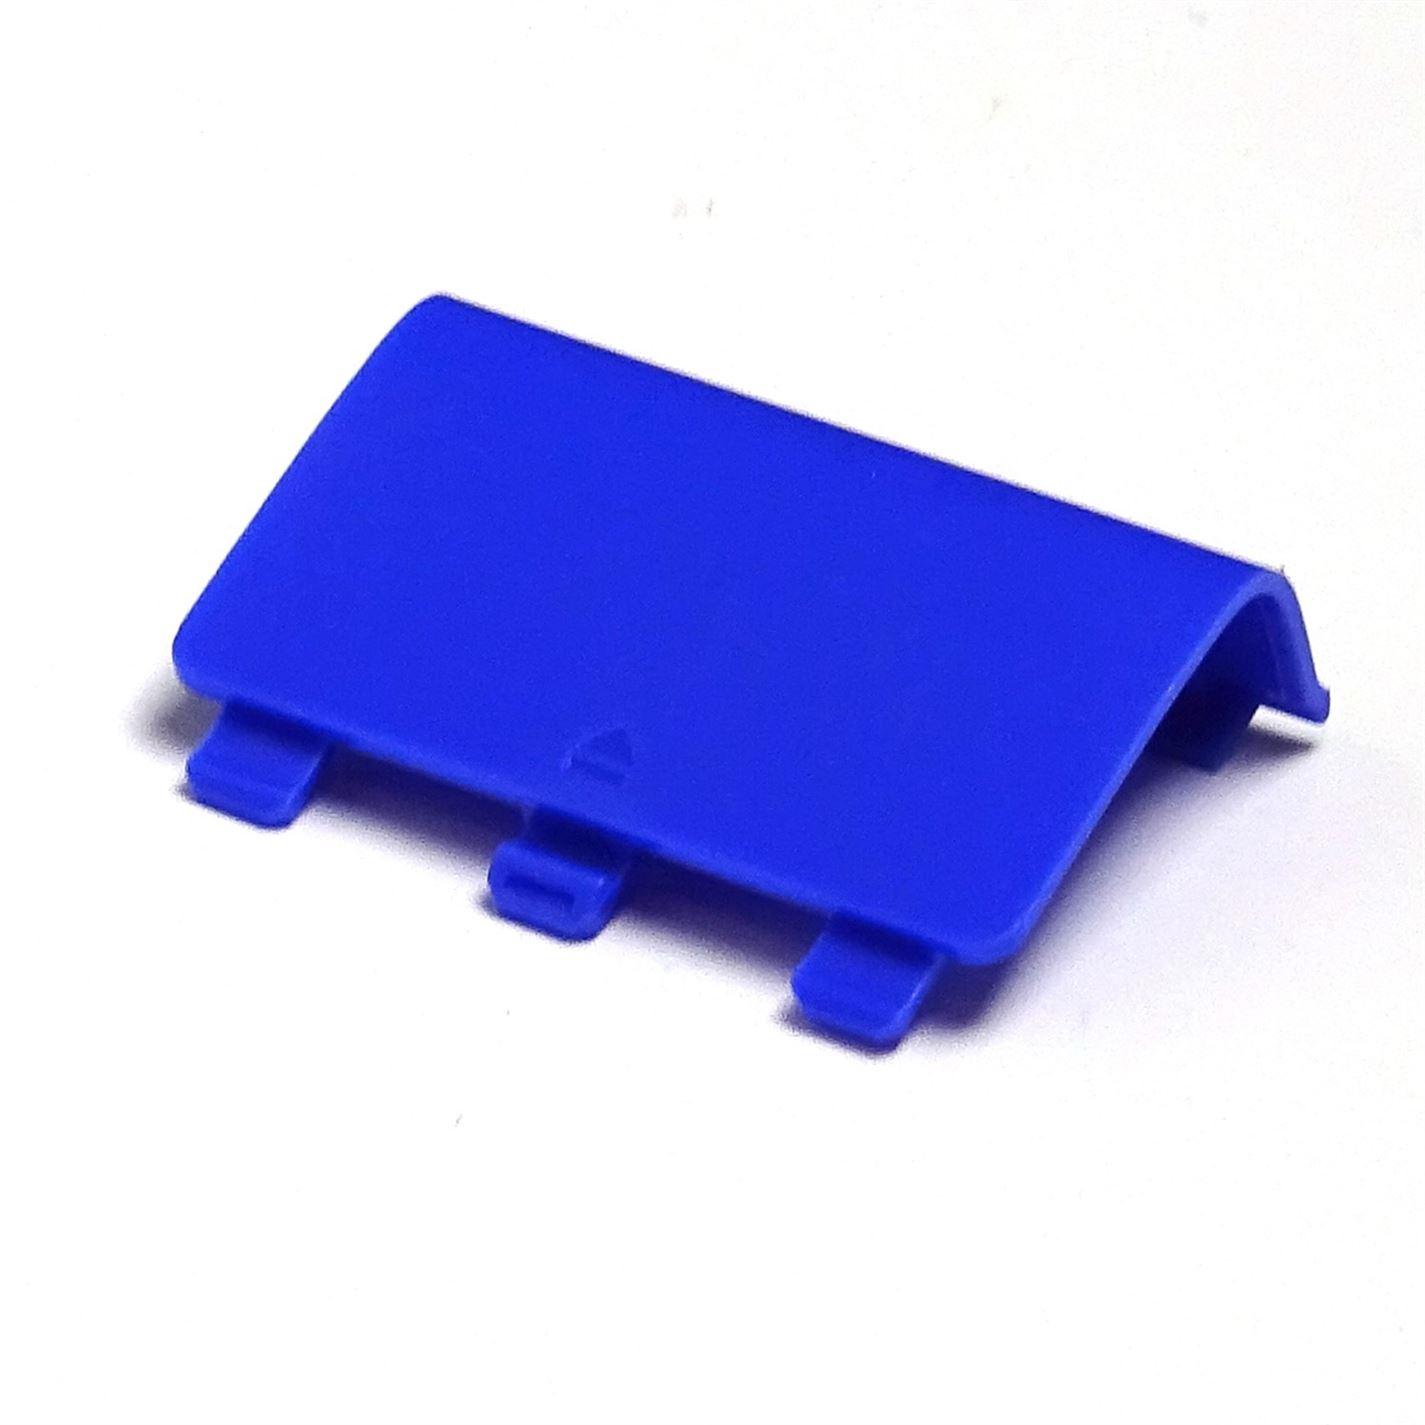 Battery Cover Door Shell Replacement for XBOX One Wireless Controller BLUE - UK Seller